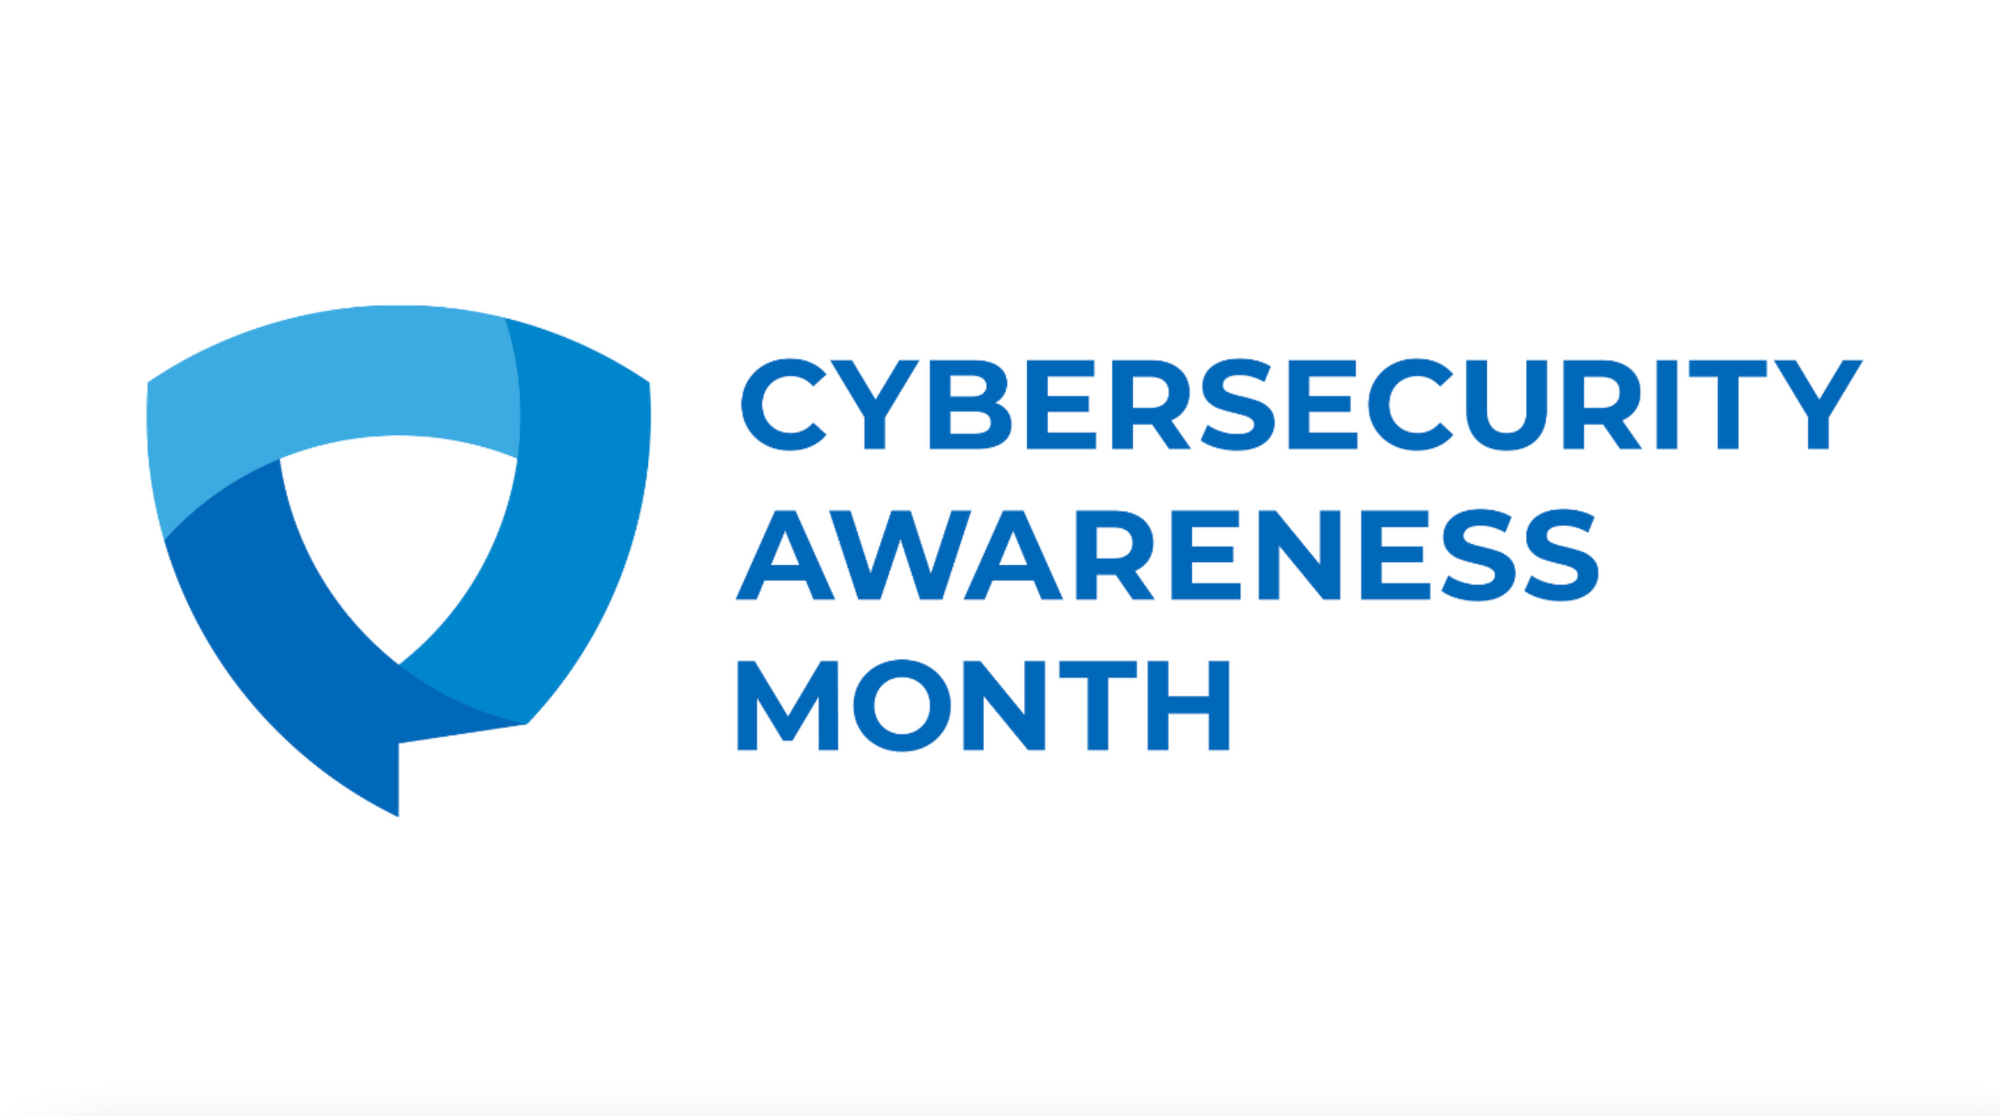 15 Cybersecurity Awareness Trivia Questions!